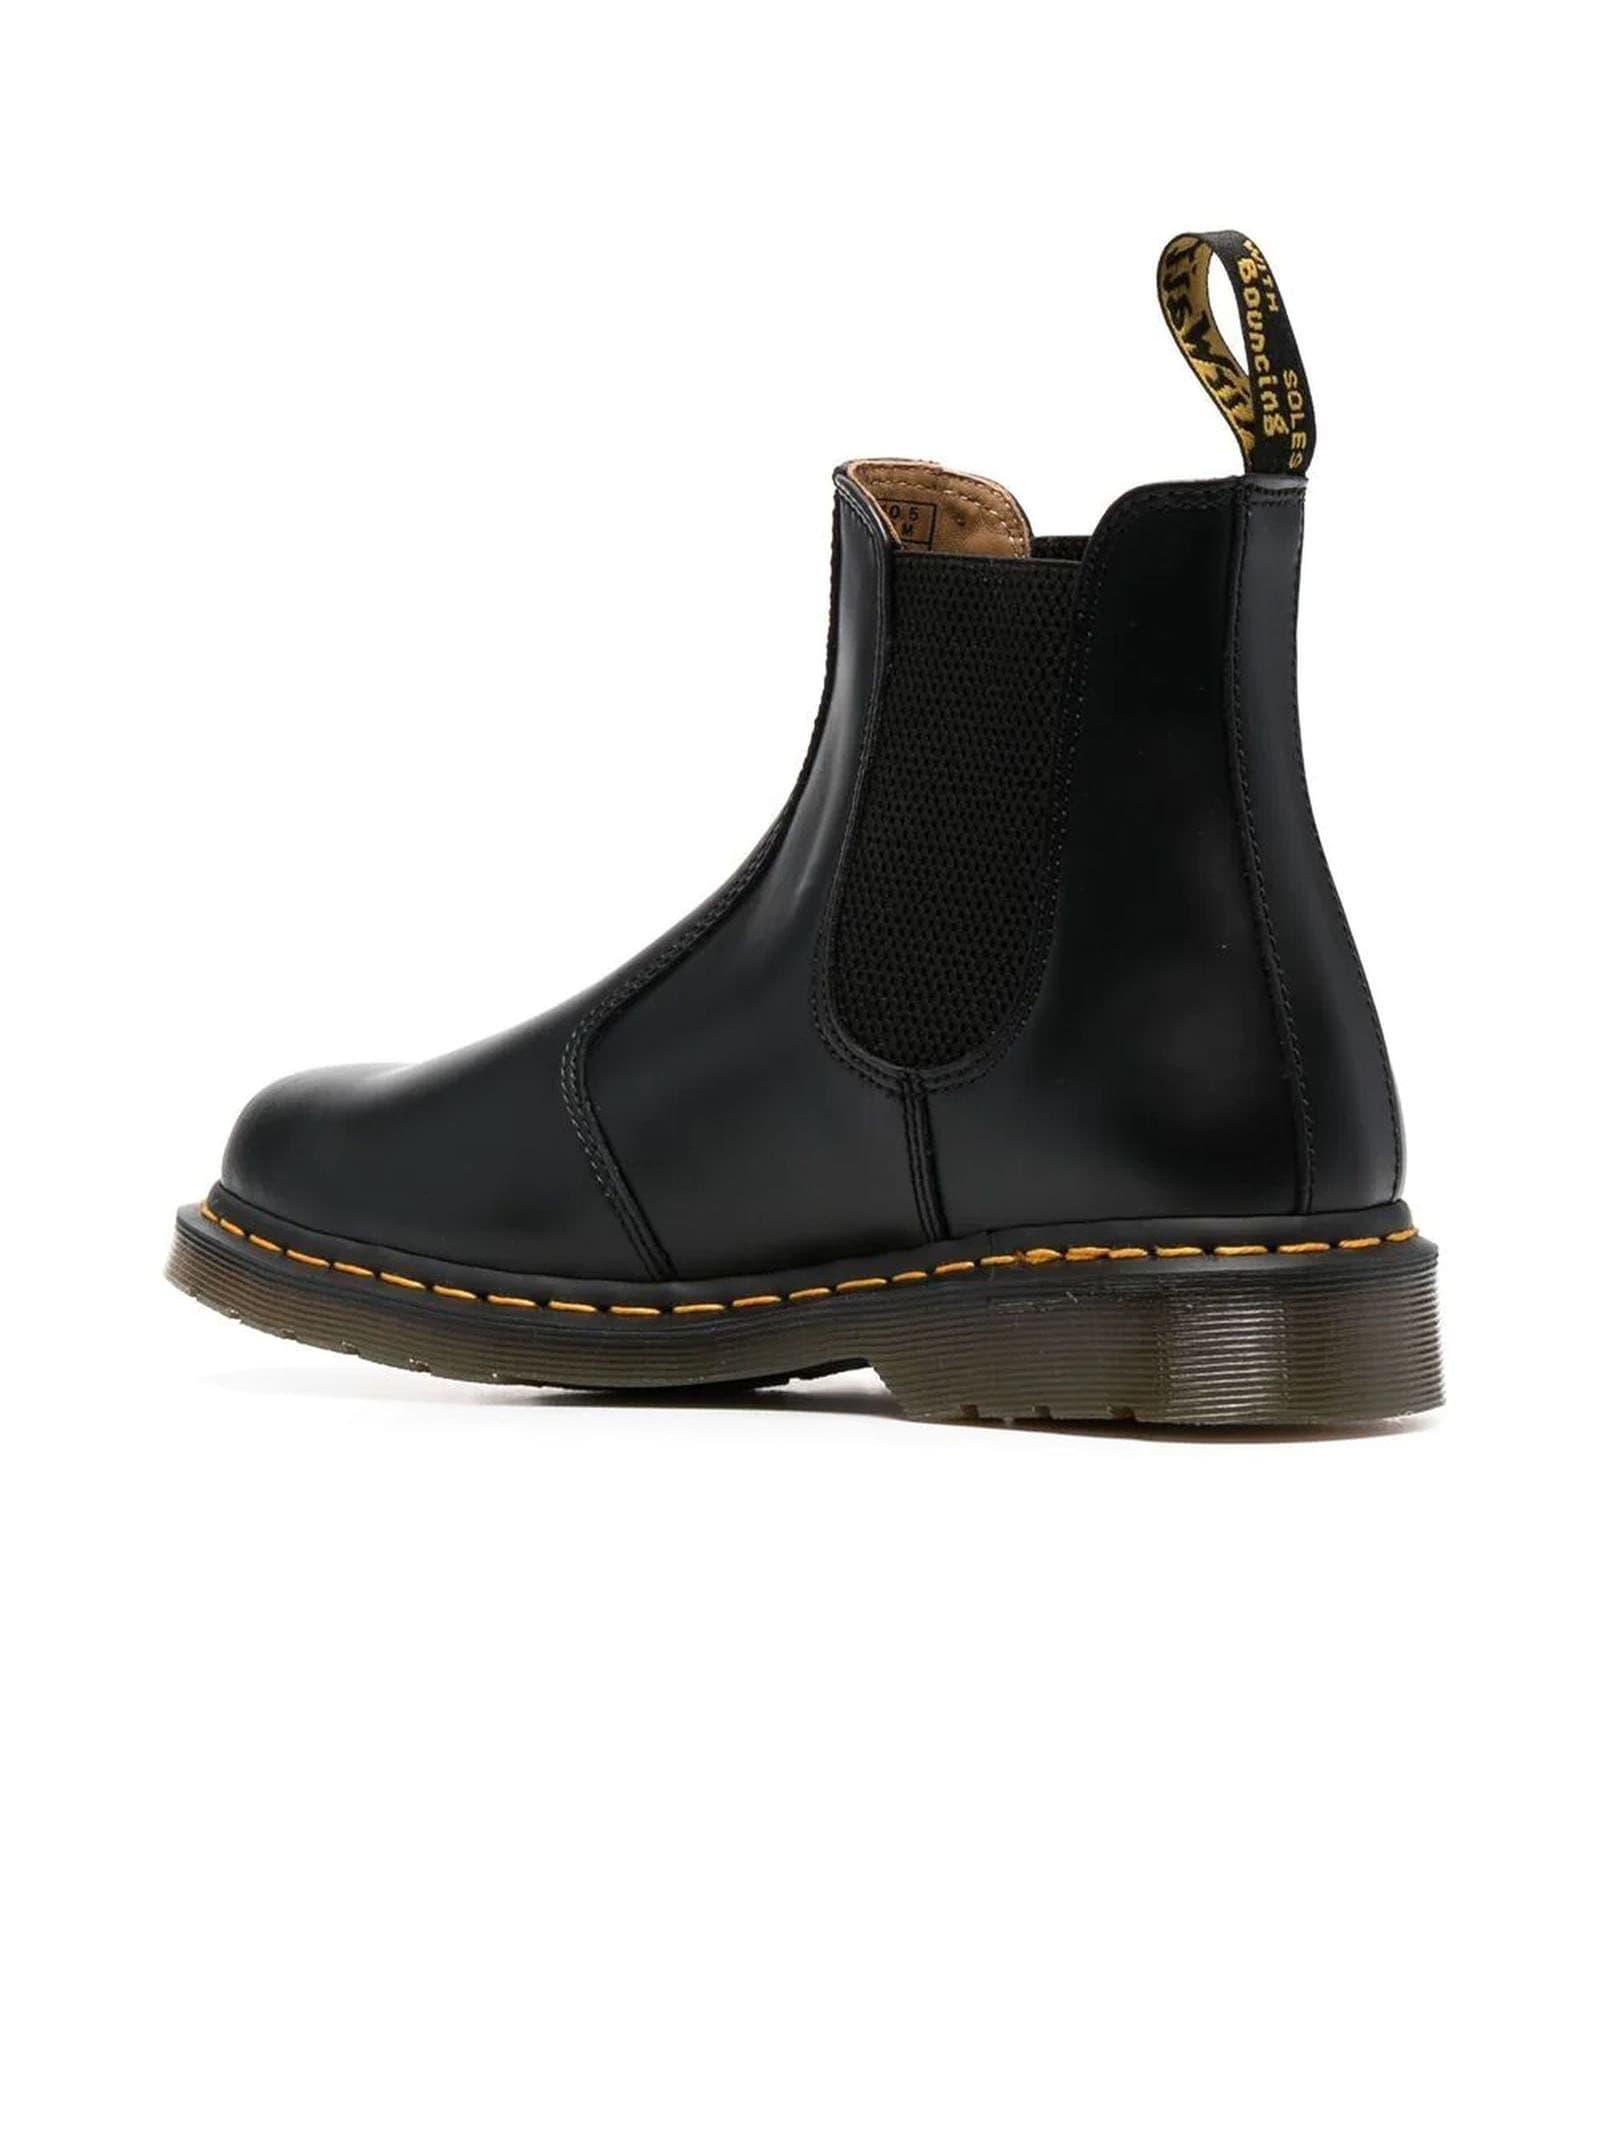 Dr. Martens Chelsea 2976 Black Leather Boots | Lyst